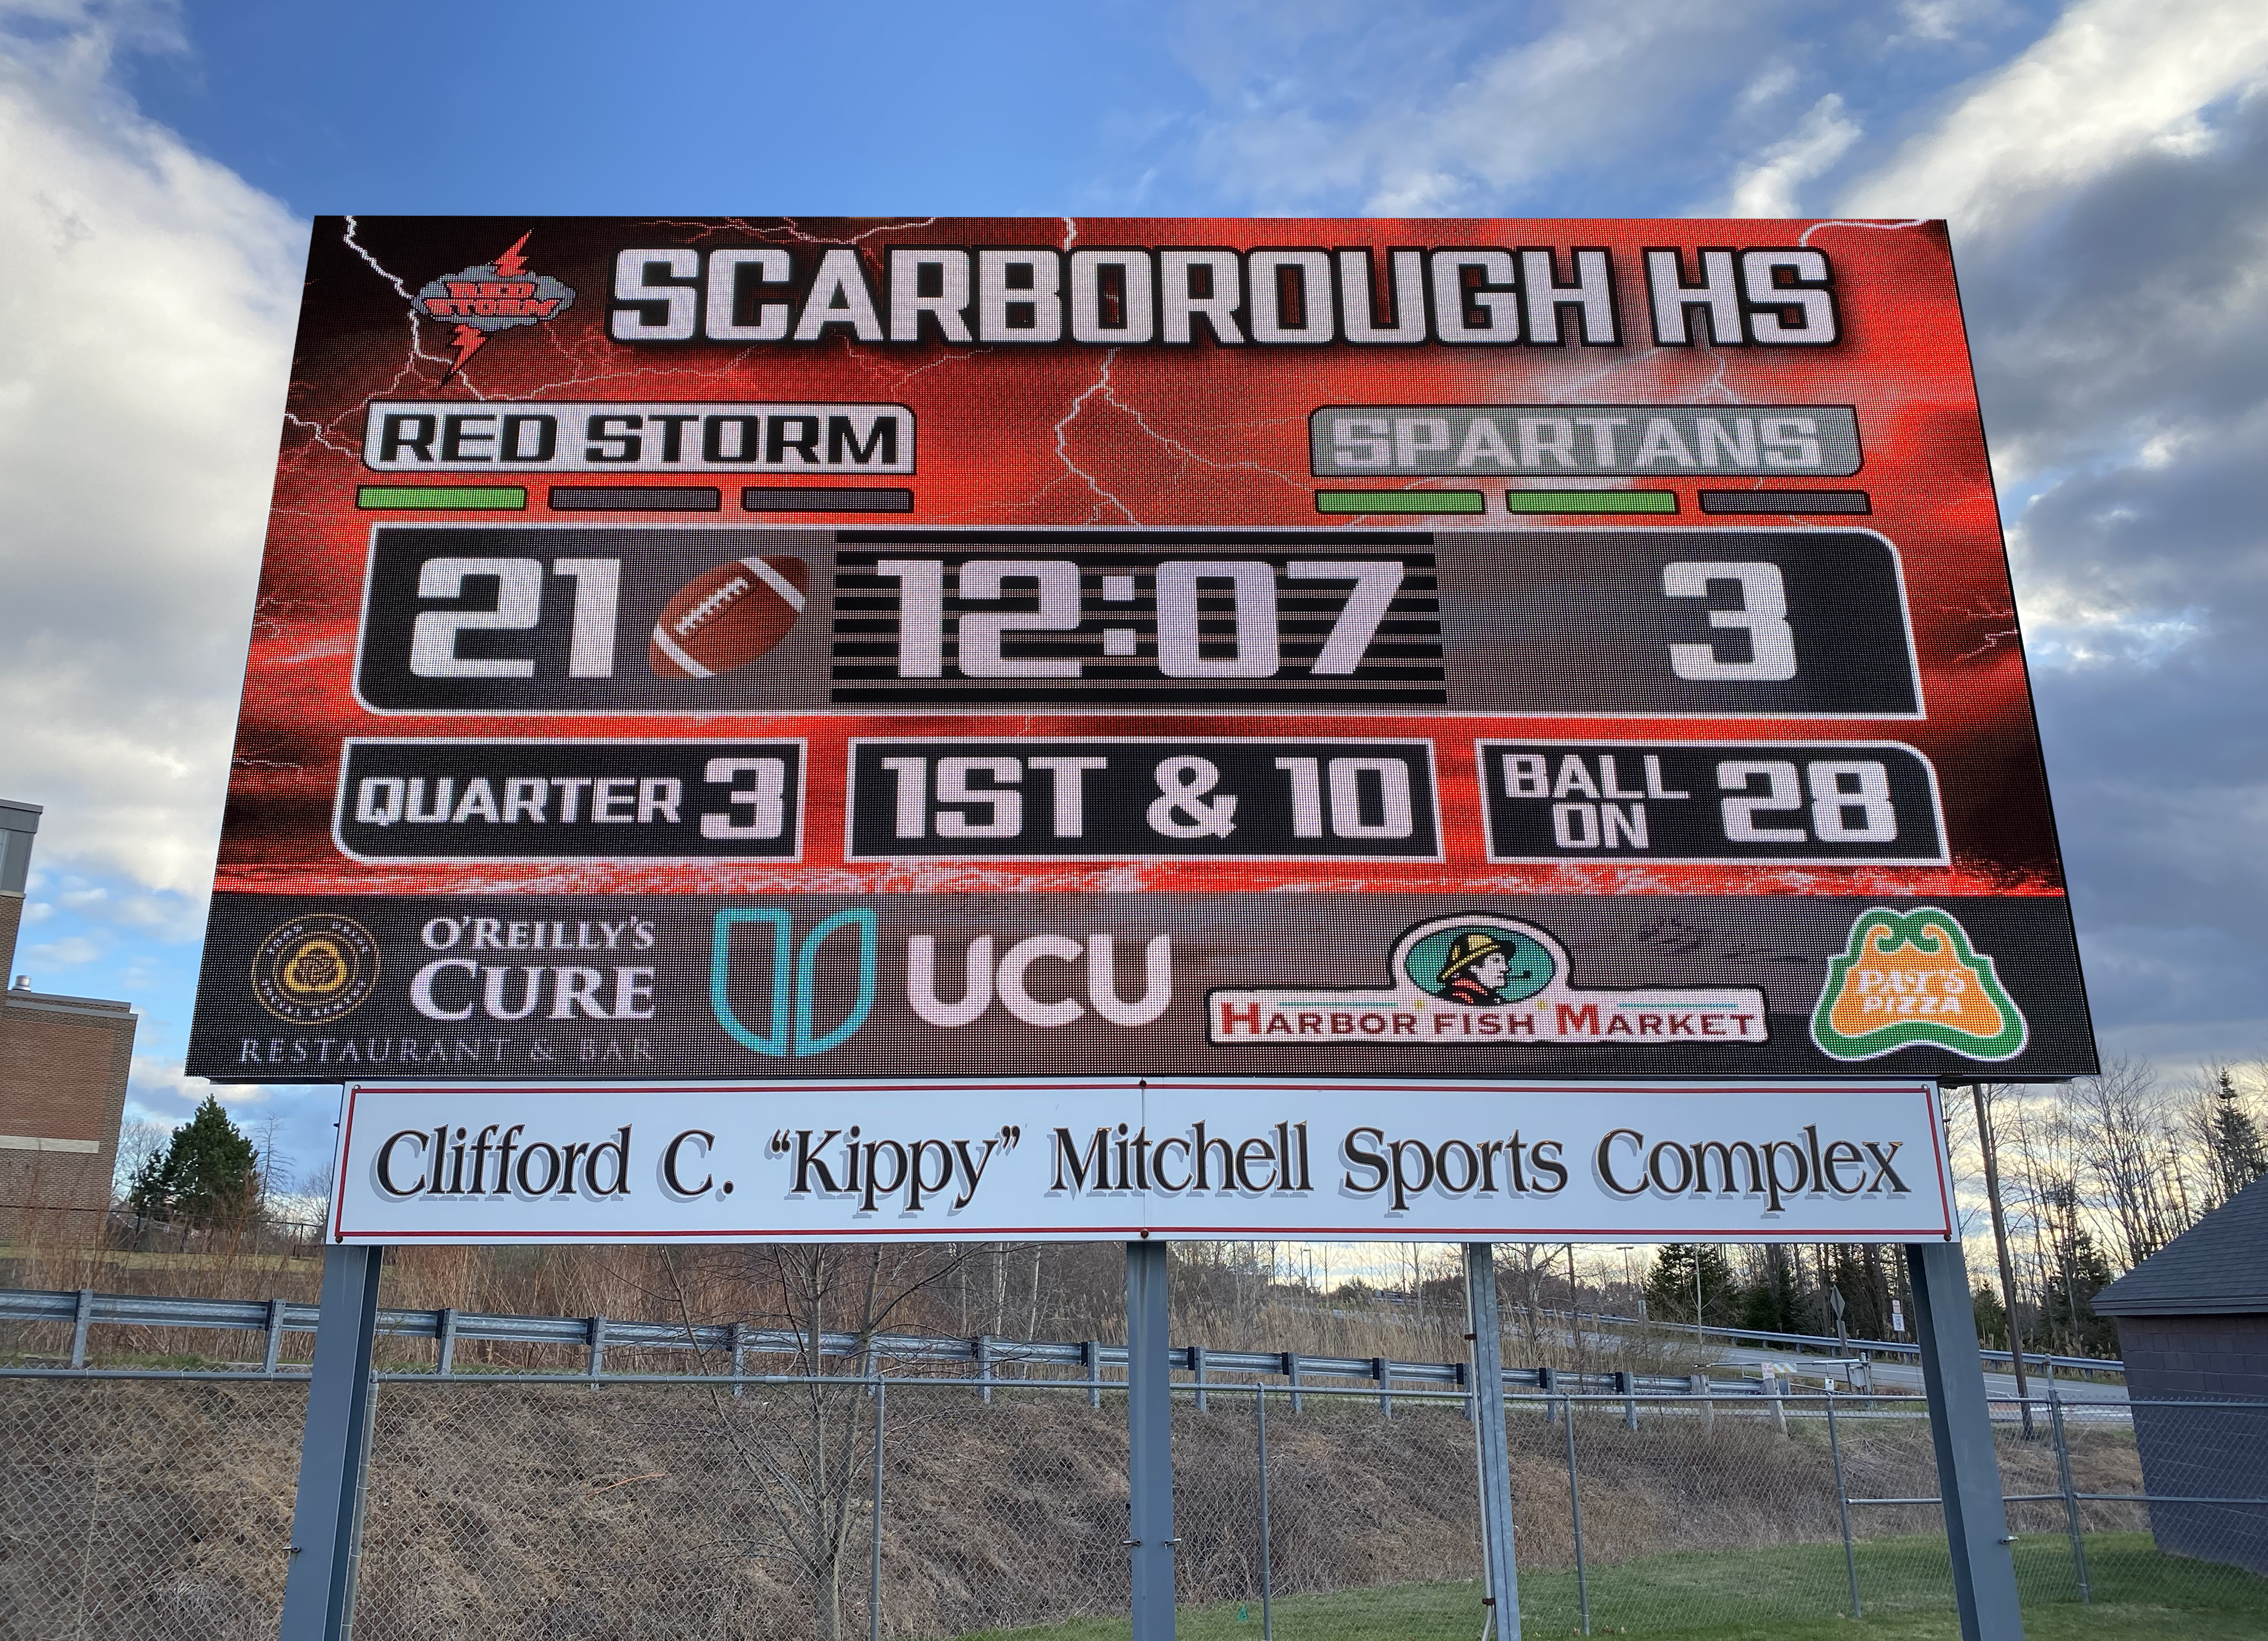 Scarborough Scoreboard AFTER EXAMPLE 2